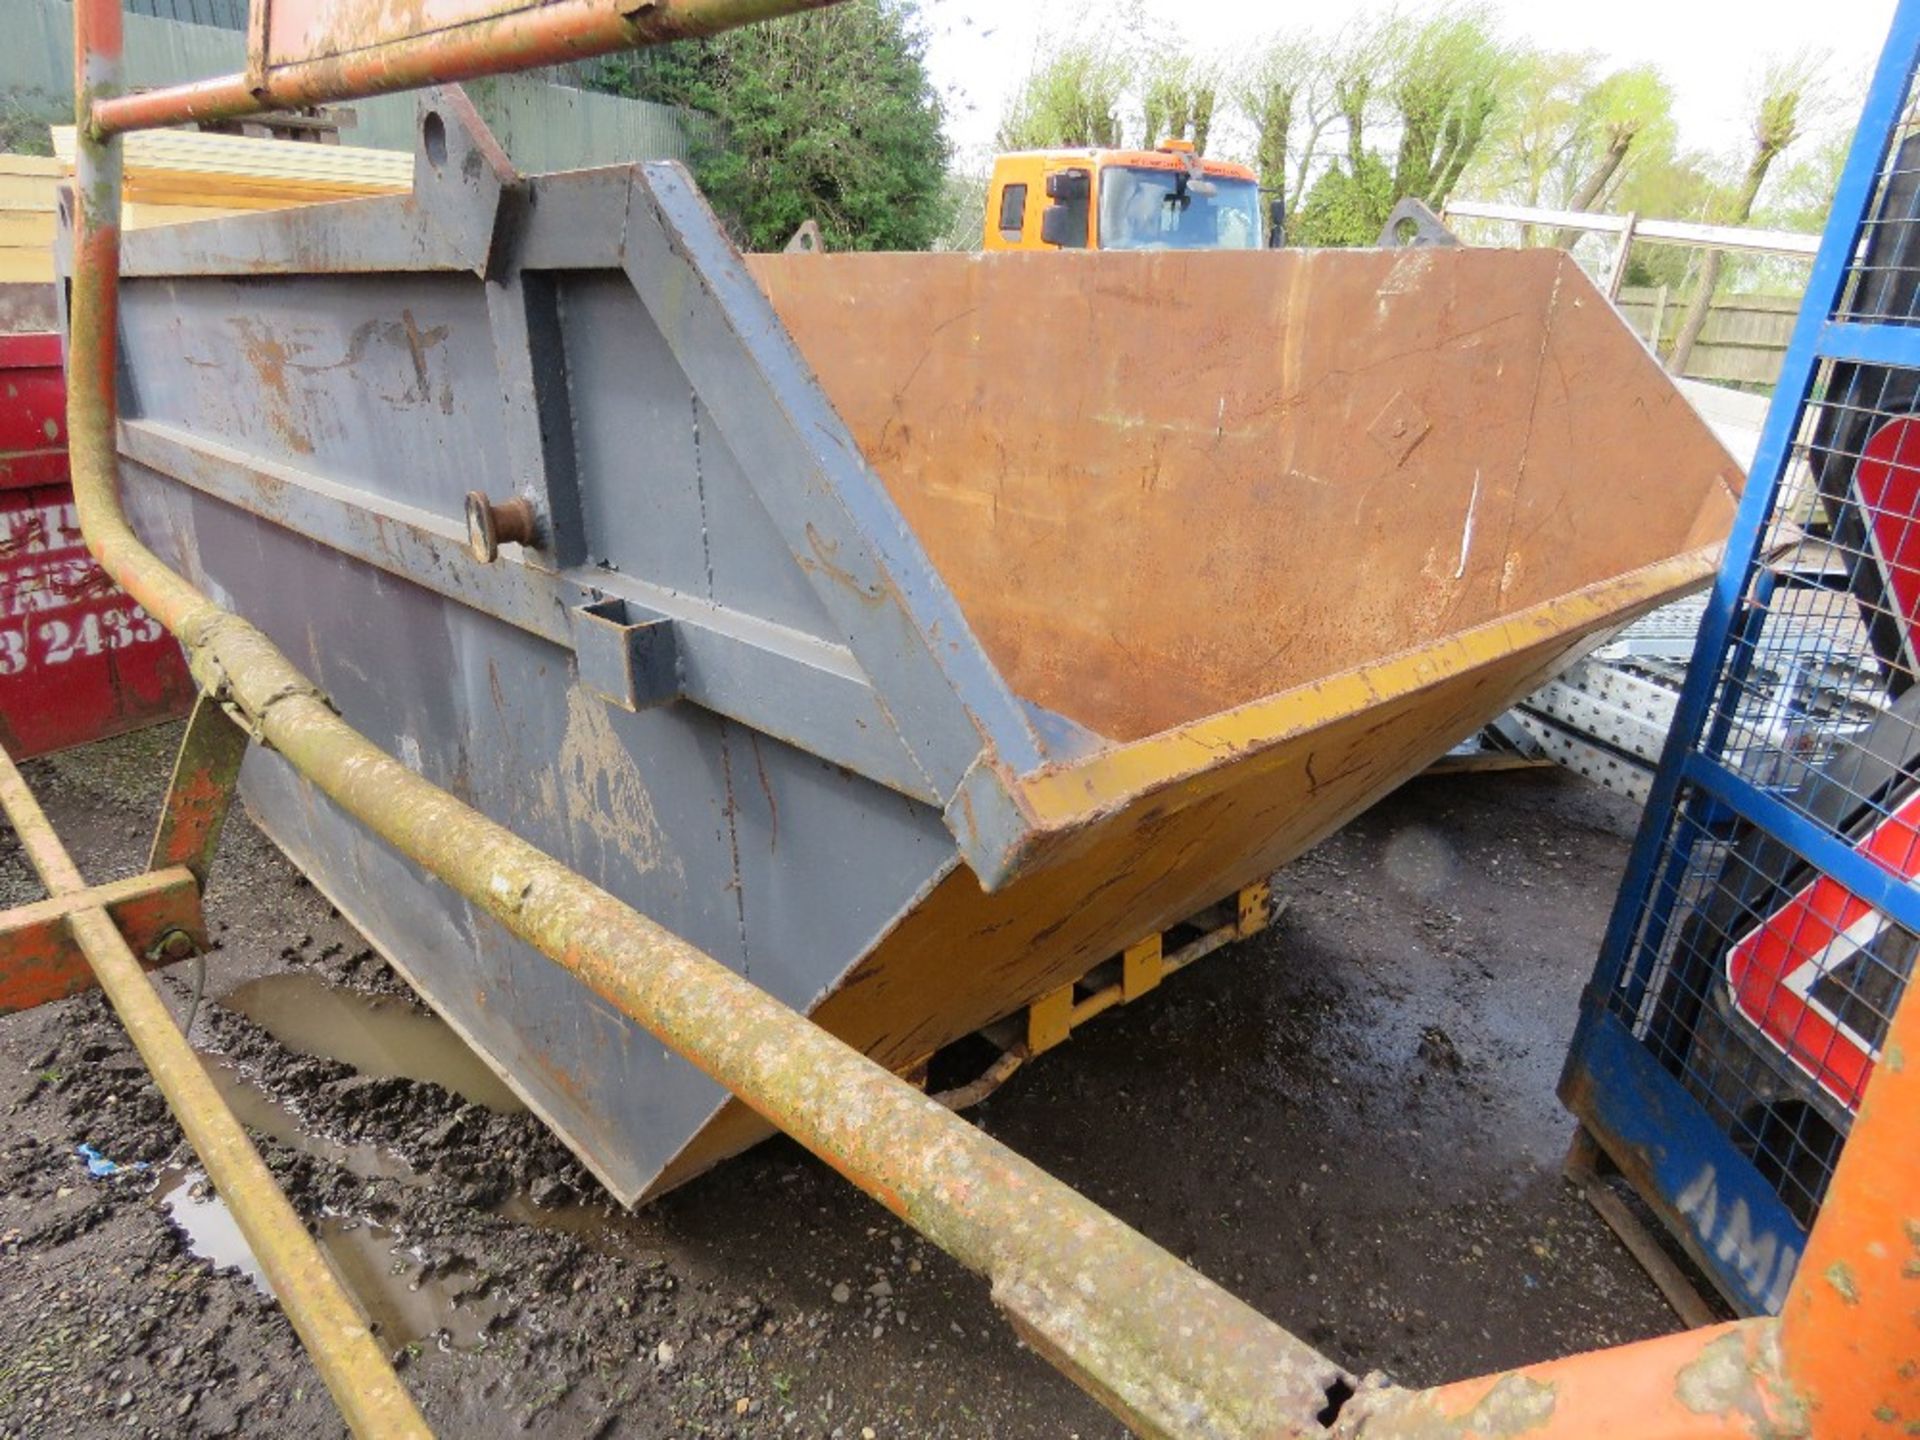 8 YARD SIZE CHAIN LIFT SKIP. CRANE LIFTING EYES AND HEAVY DUTY SPECIFICATION, APPEARS LITTLE USED. S - Image 4 of 4